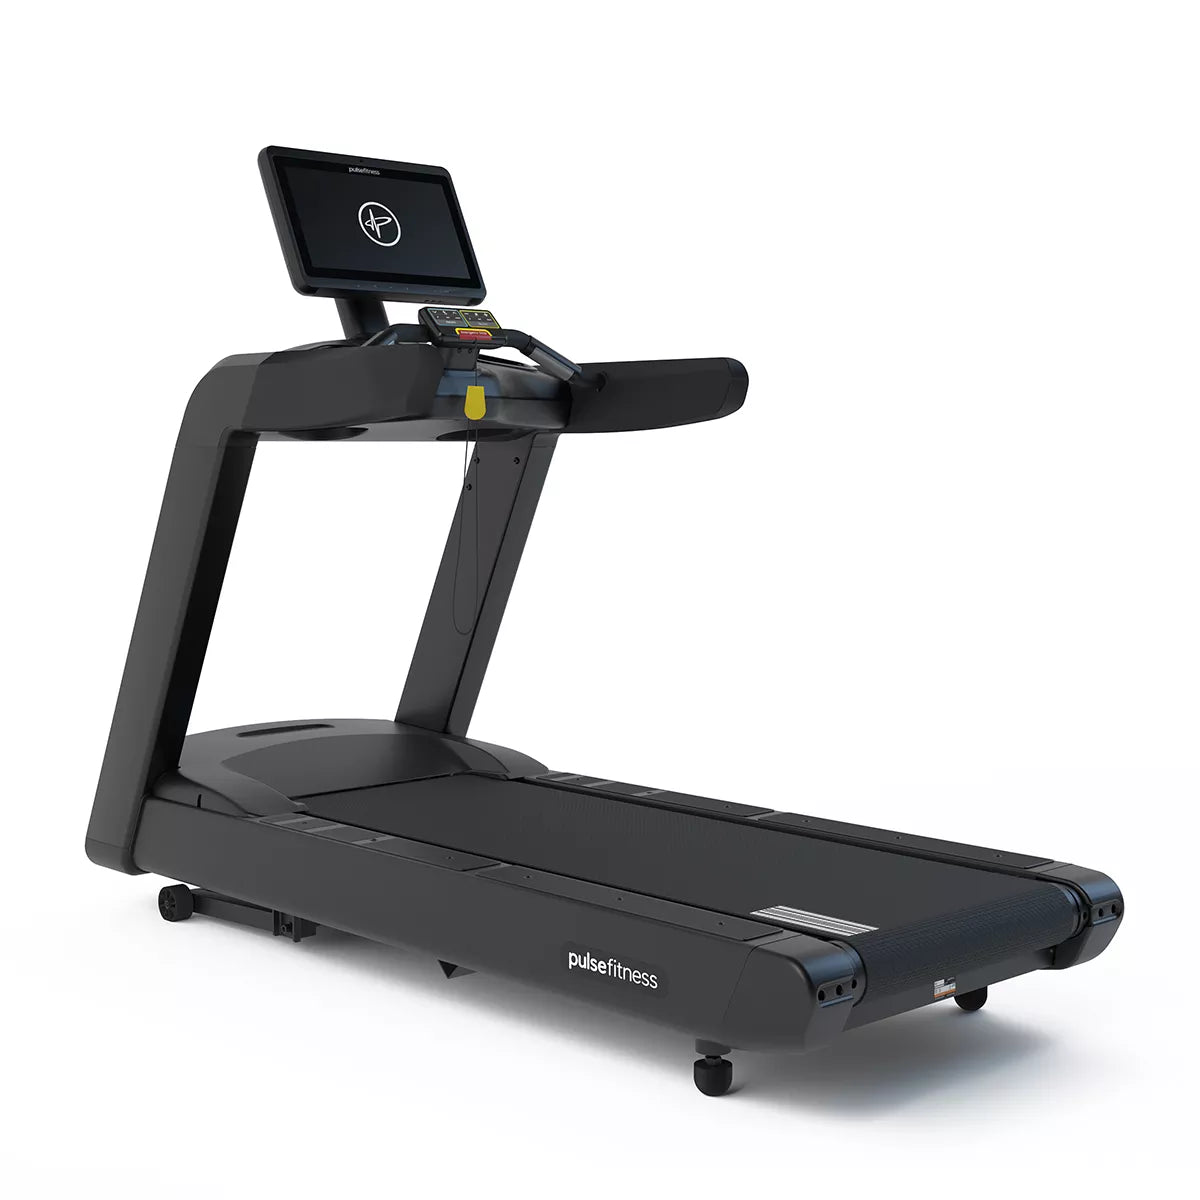 Pulse Fitness Premium Treadmill with 18.5" Touchscreen Console